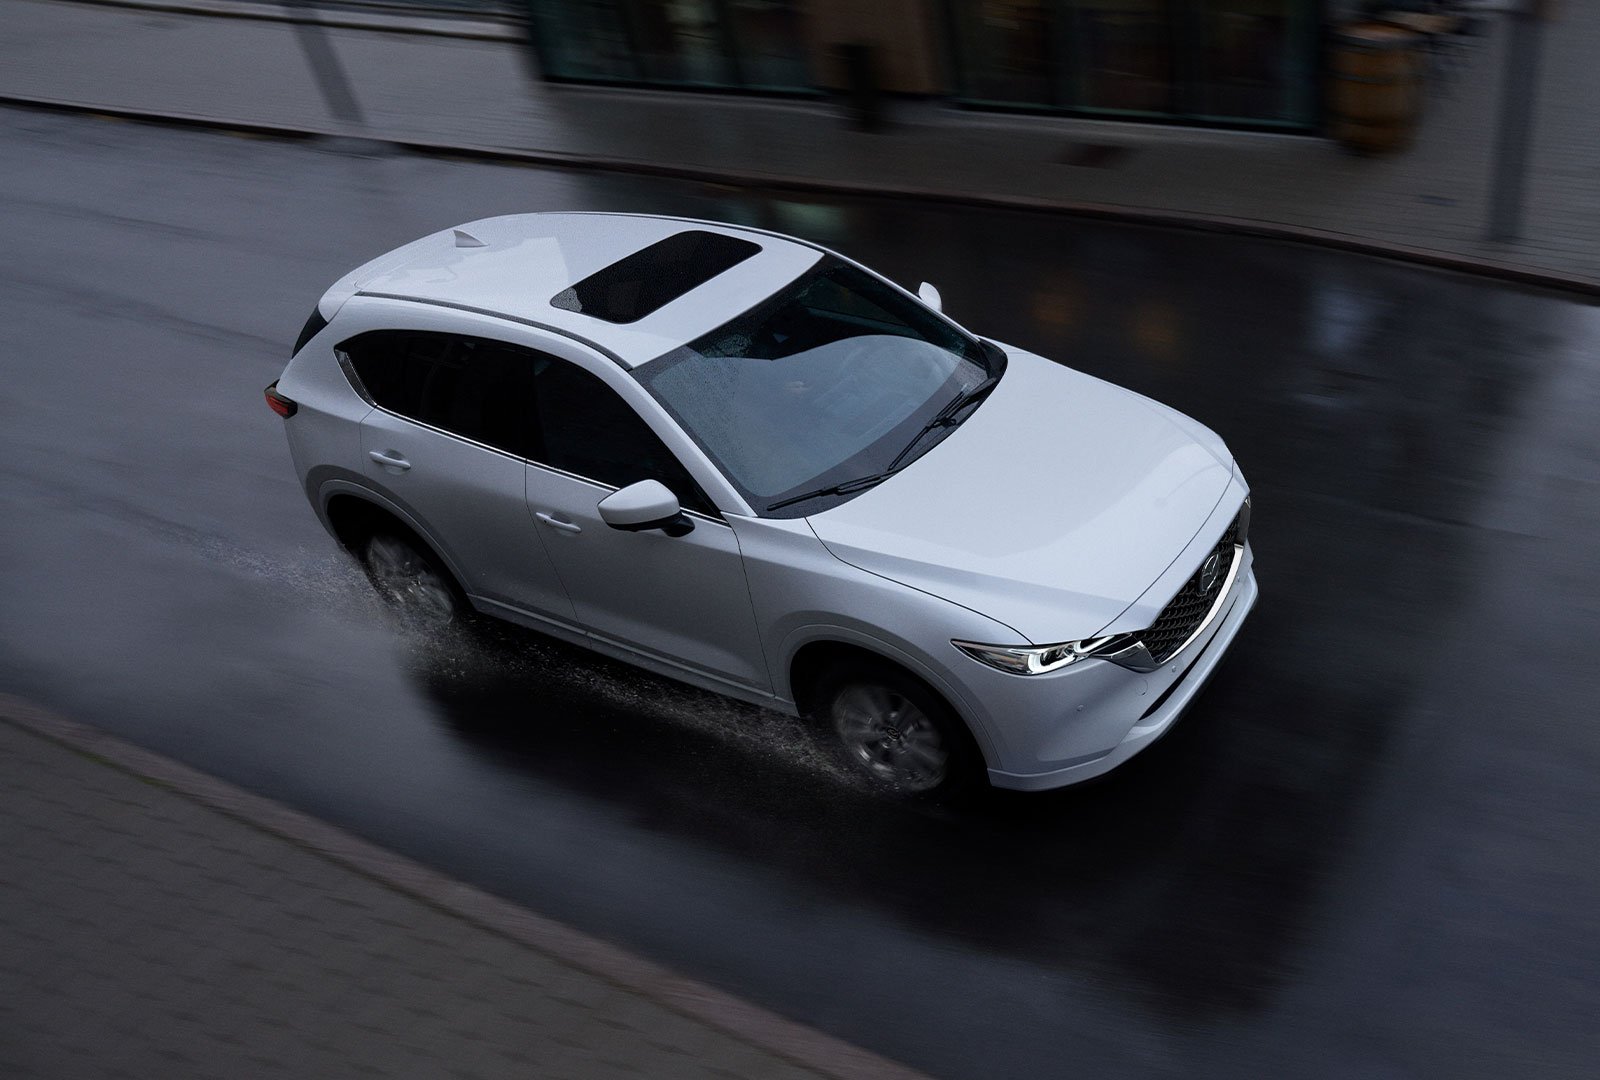 Overhead view of Snowflake White Pearl Mazda CX-5 with moonroof driving along city street in rain.